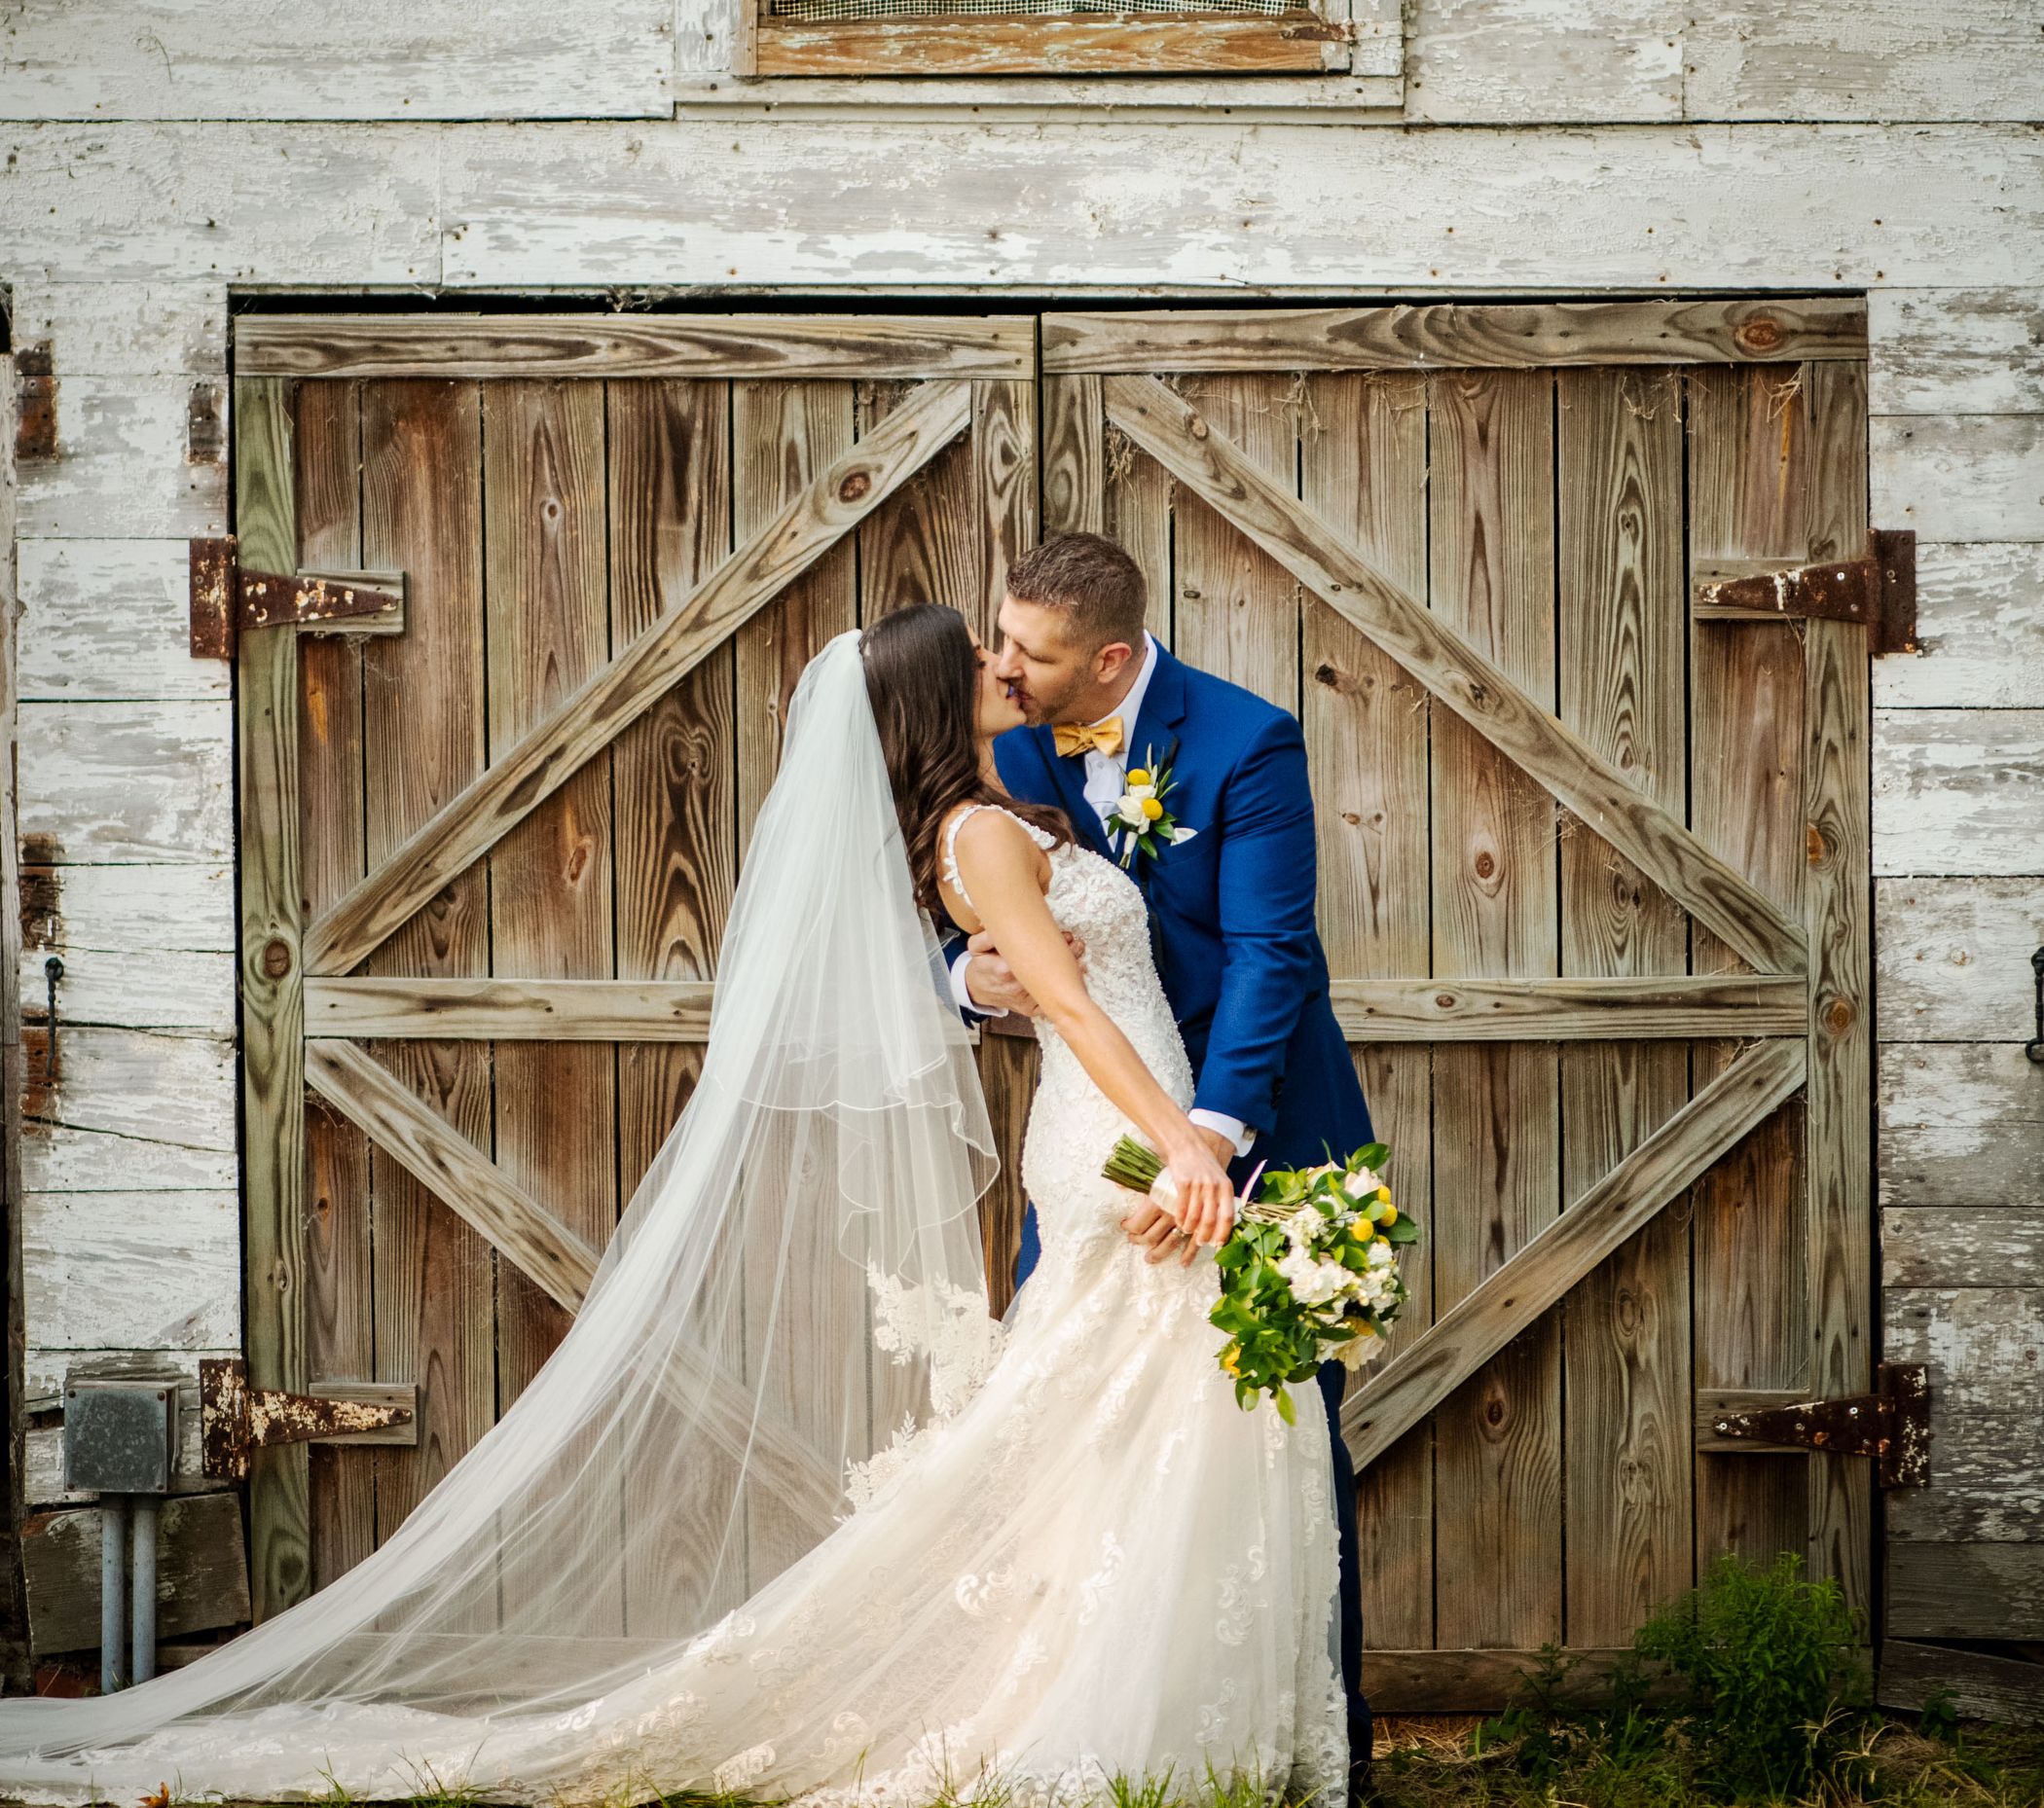 Bridal beauty in lace at the rustic barn